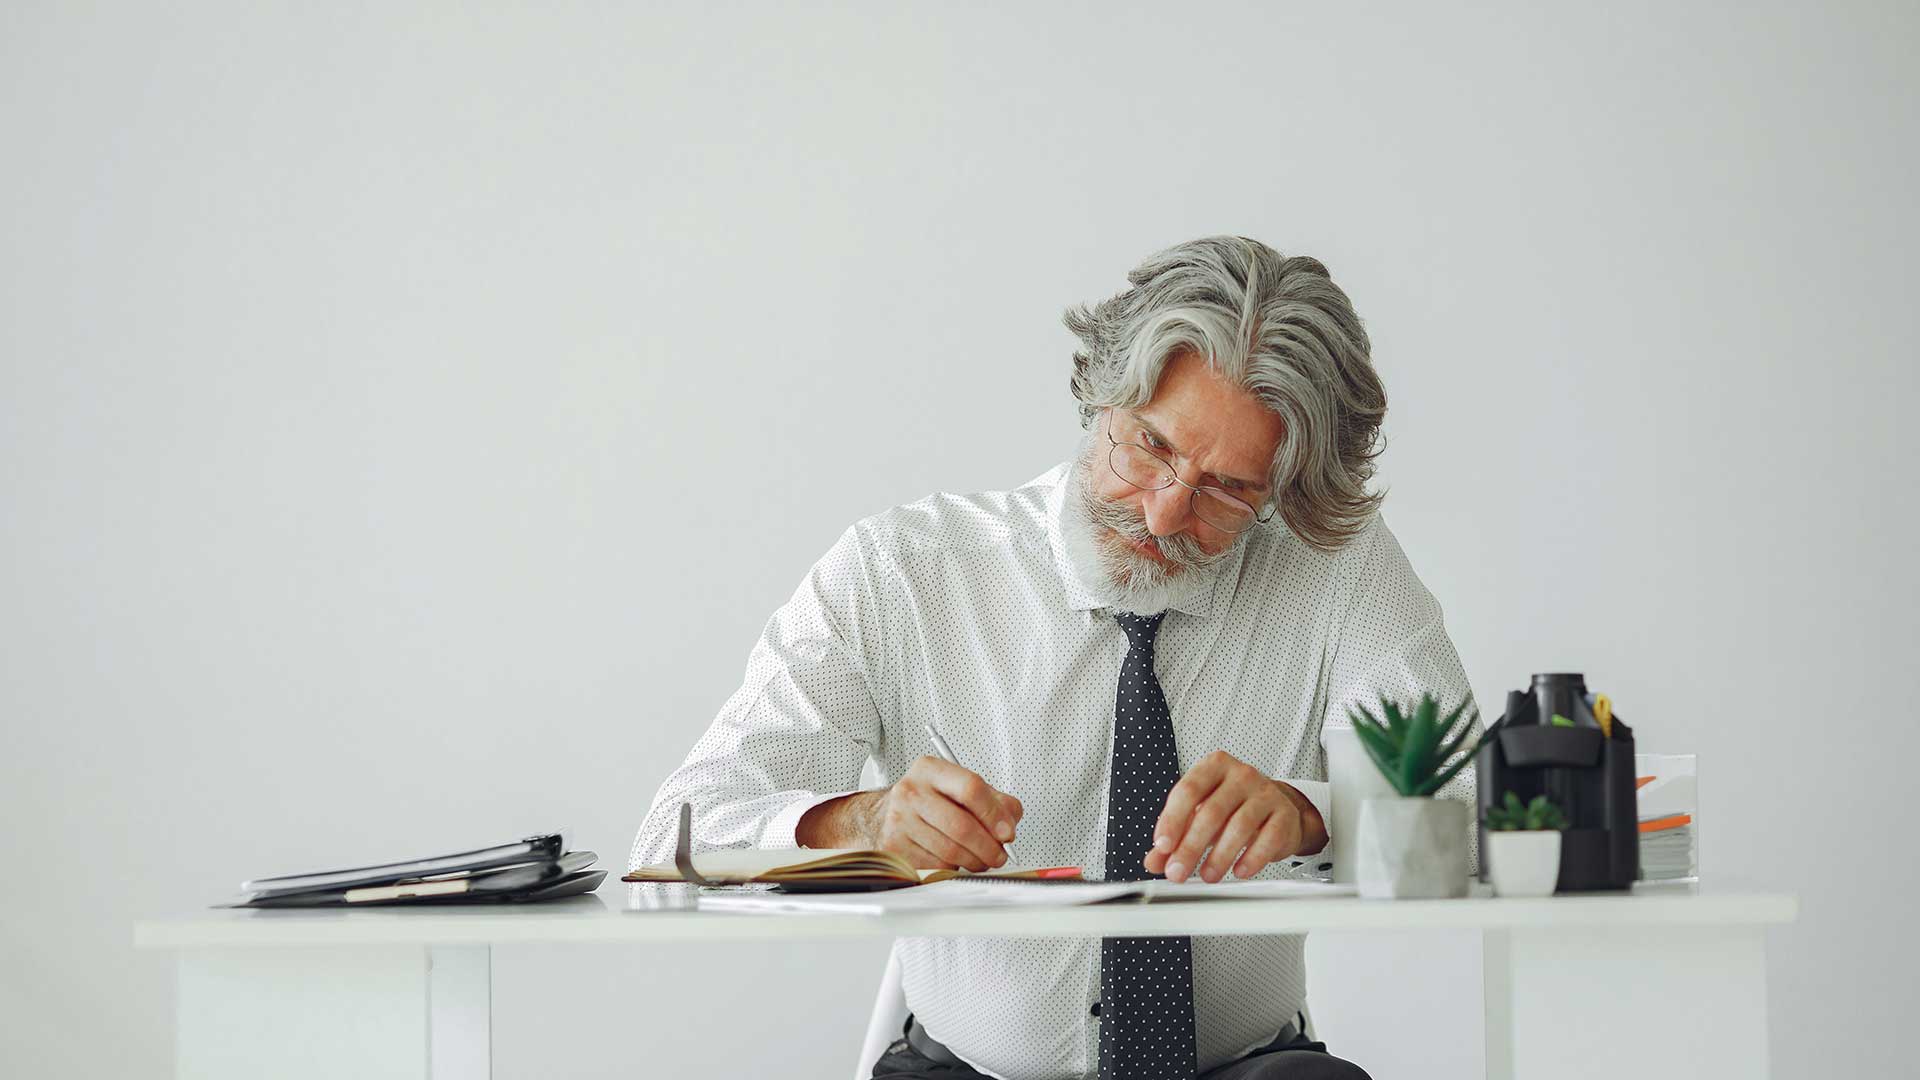 An older white man with thin rimmed glasses and medium-length grey hair is sitting at a desk and writing intently in a notebook. He is wearing a white long sleeved work shirt and navy blue tie. On the desk is a small pile of notebooks and a couple of small desk top sized plants.